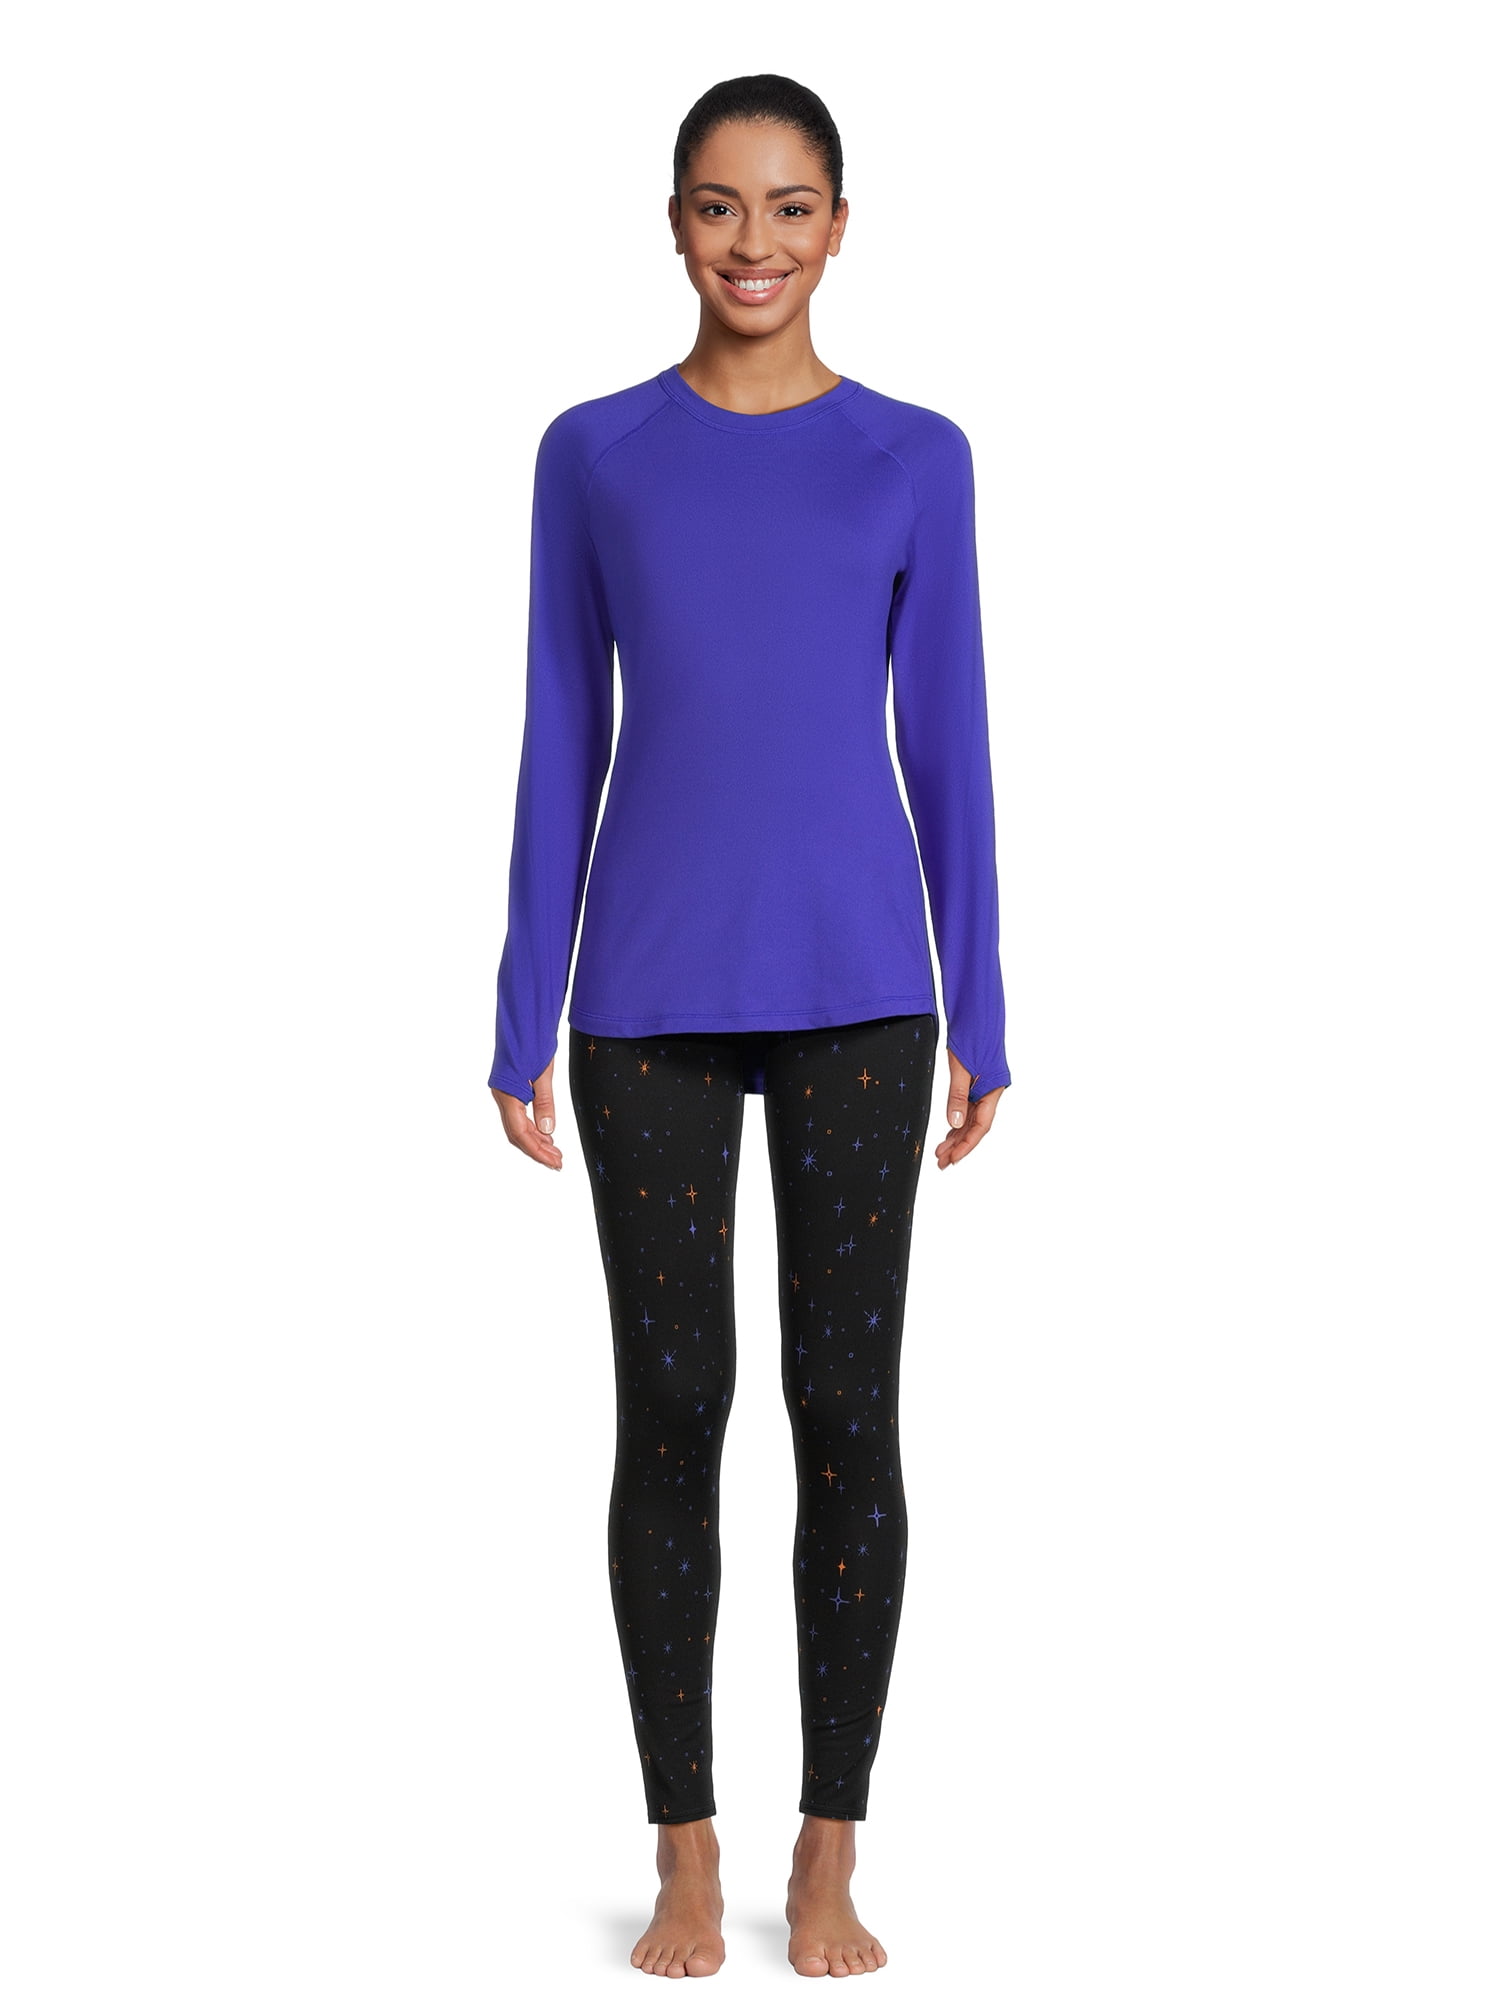 Cuddl Duds Women's Base Layers Tops or Leggings 2-Packs Only $7.81